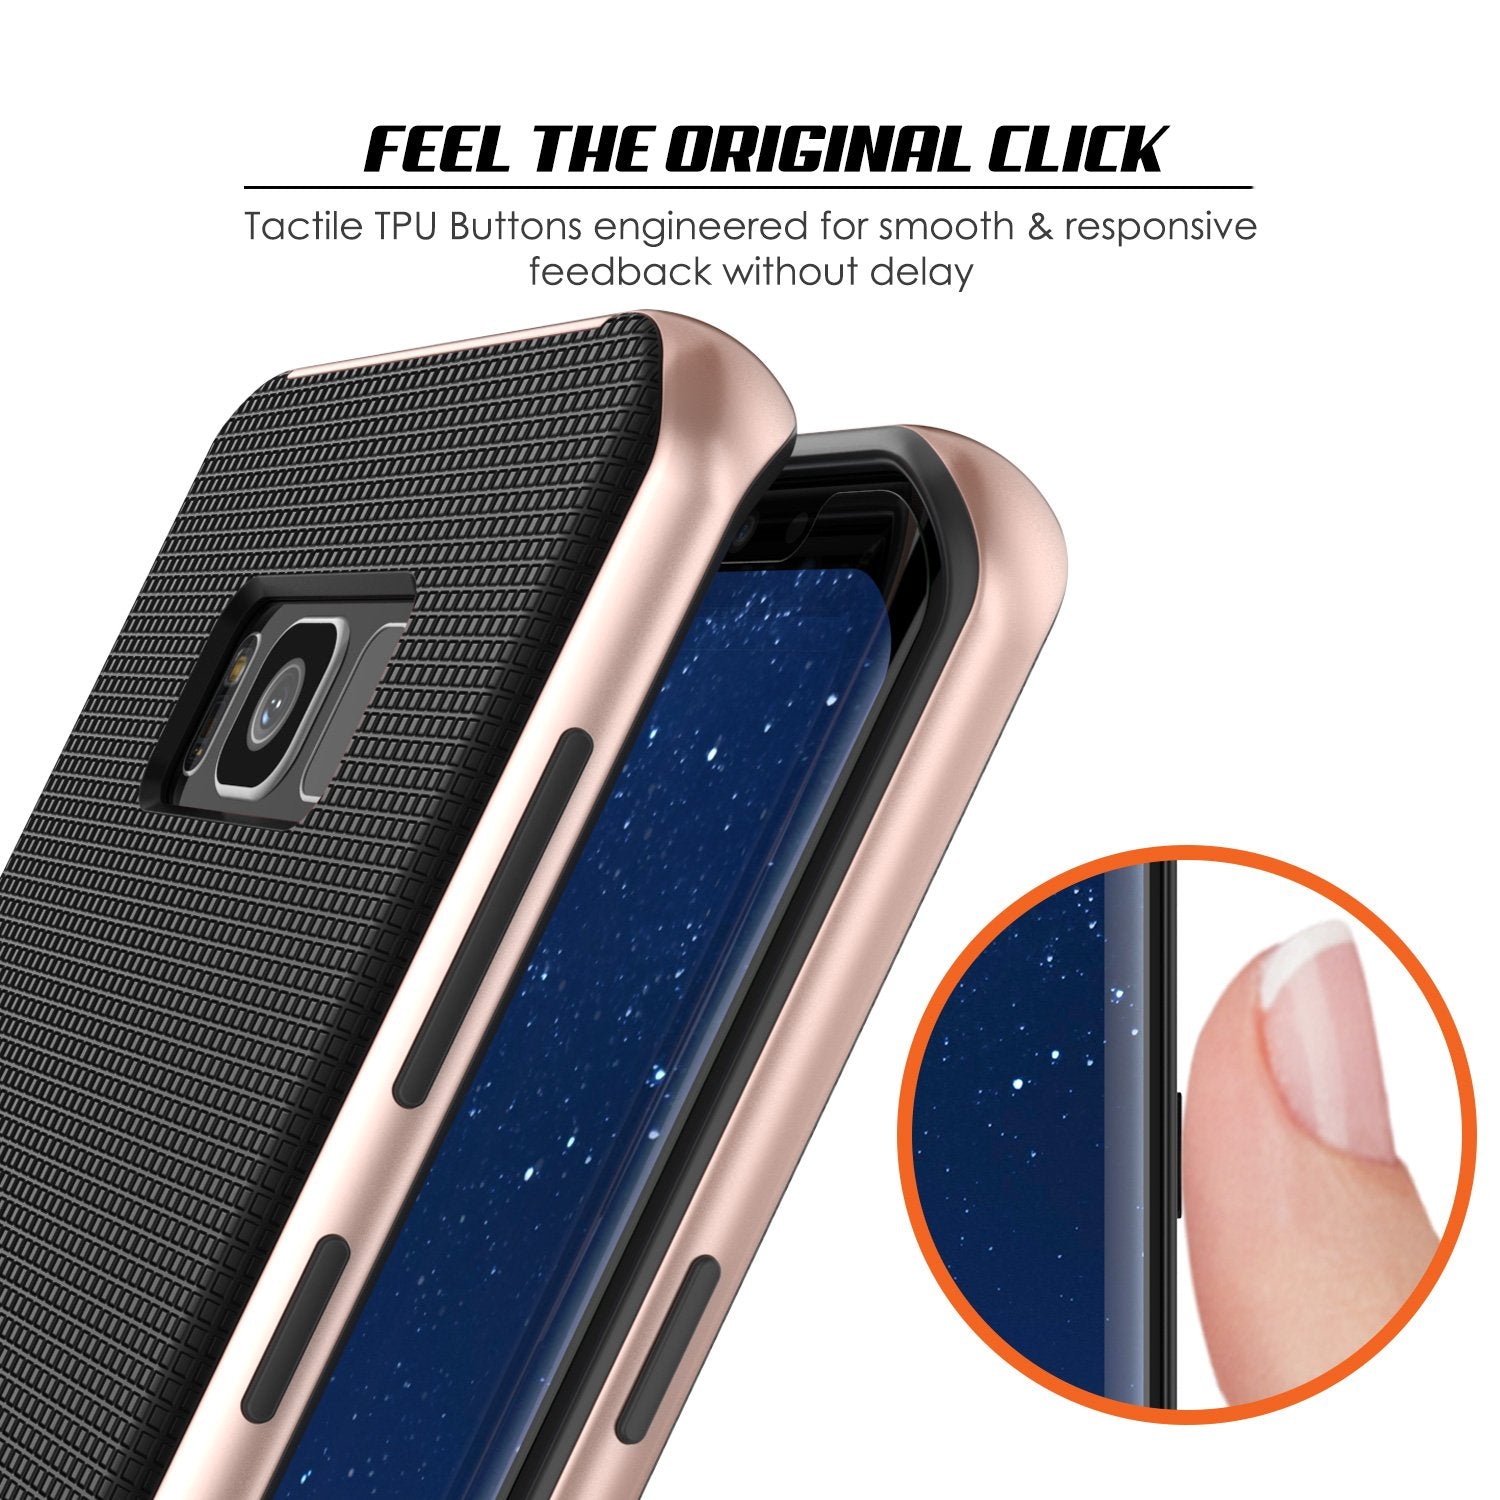 Galaxy S8 Case, PunkCase [Stealth Series] Hybrid 3-Piece Shockproof Dual Layer Cover [Rose Gold]